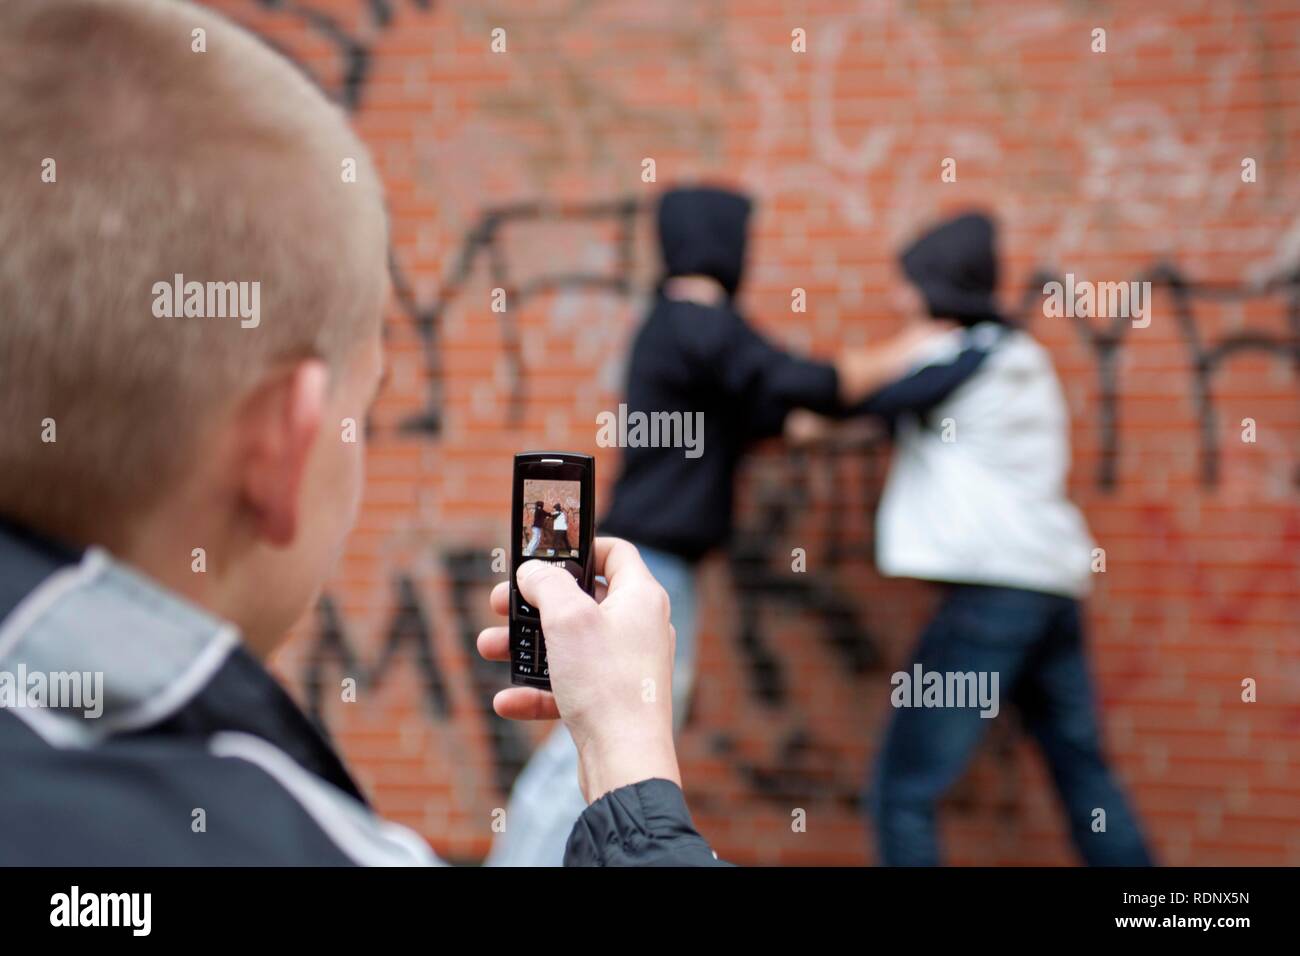 Two boys fighting on the playground while a third films with his cell phone, posed scene Stock Photo